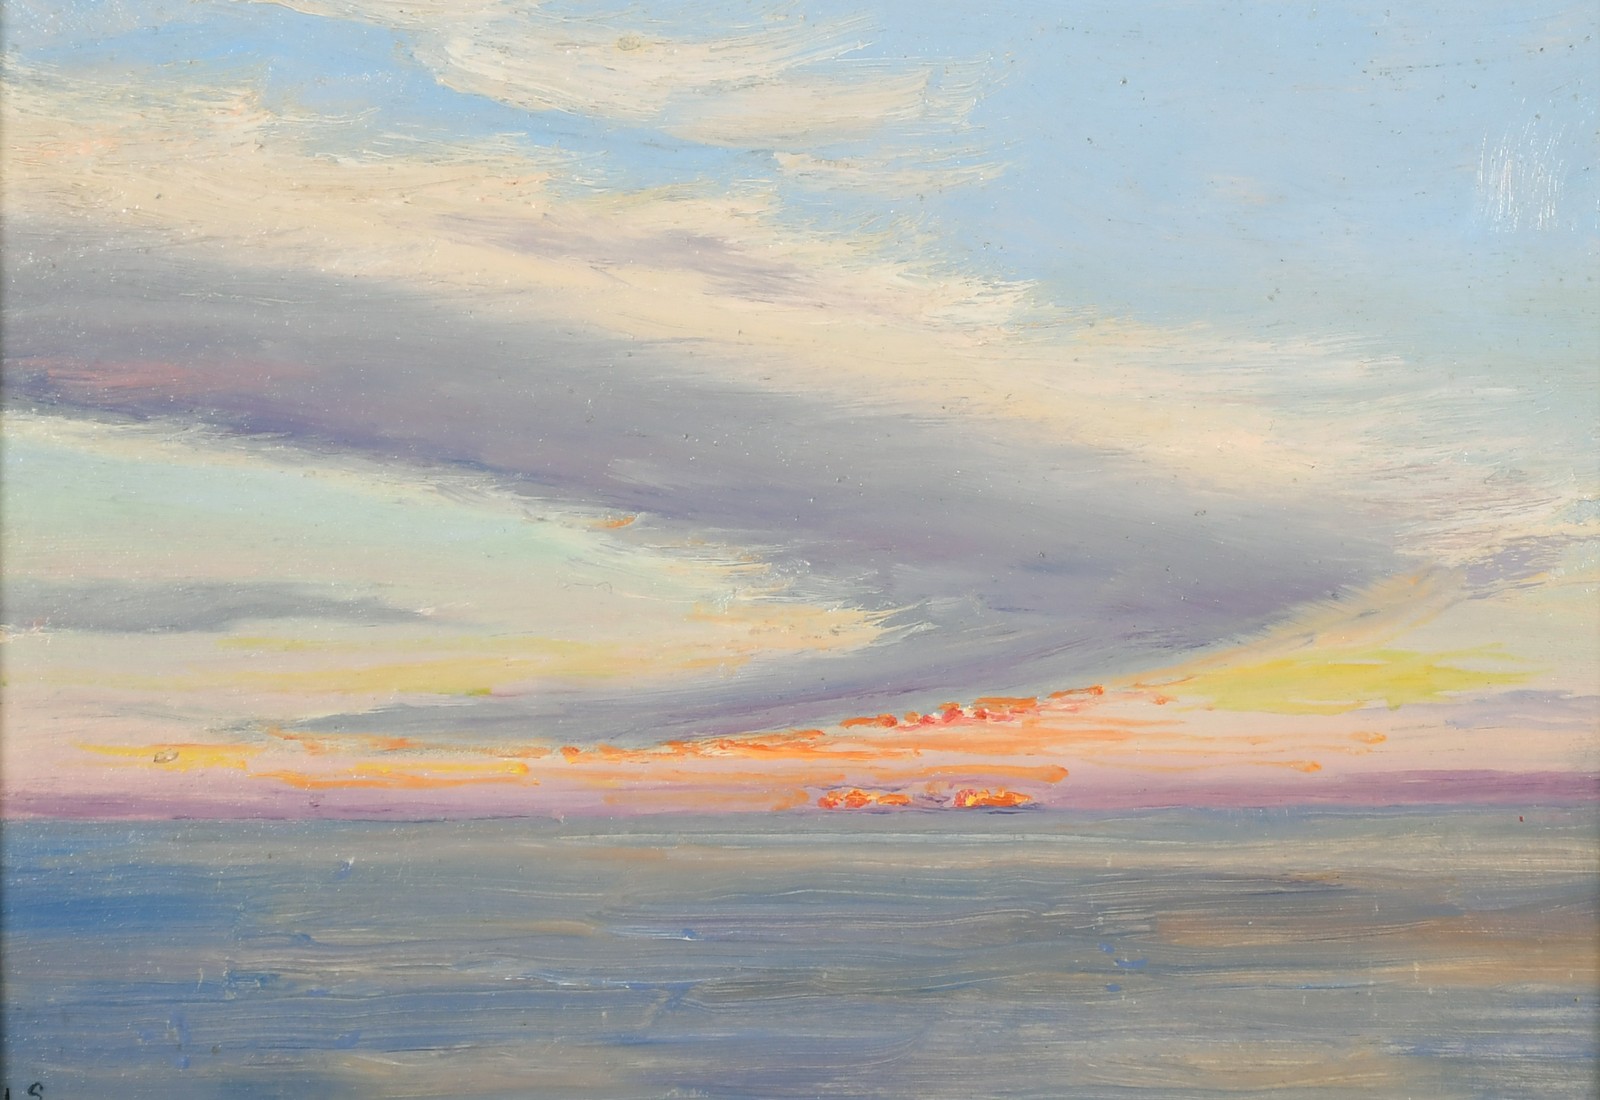 L.S. circa 1930, a view of the setting sun at sea, oil on panel, signed with initials, along with